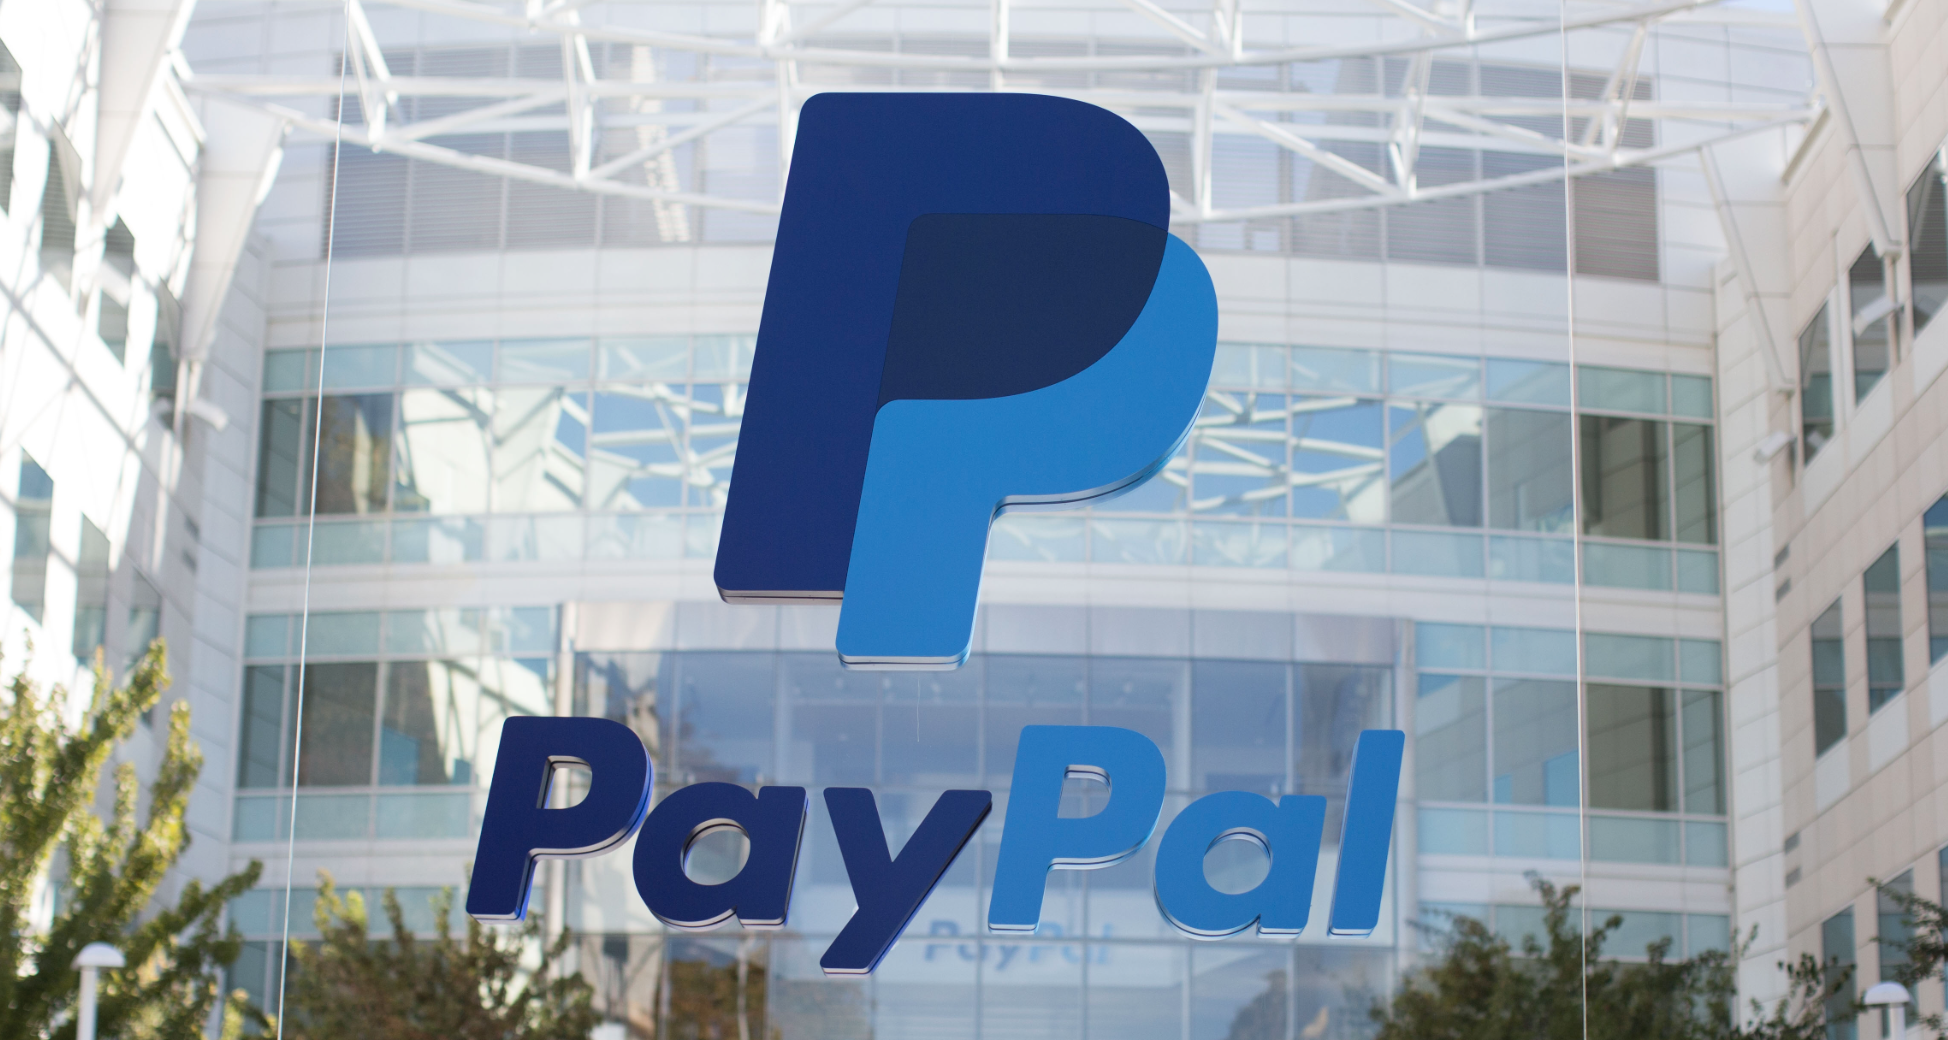 Where Will PayPal Holdings Be in 10 Years?